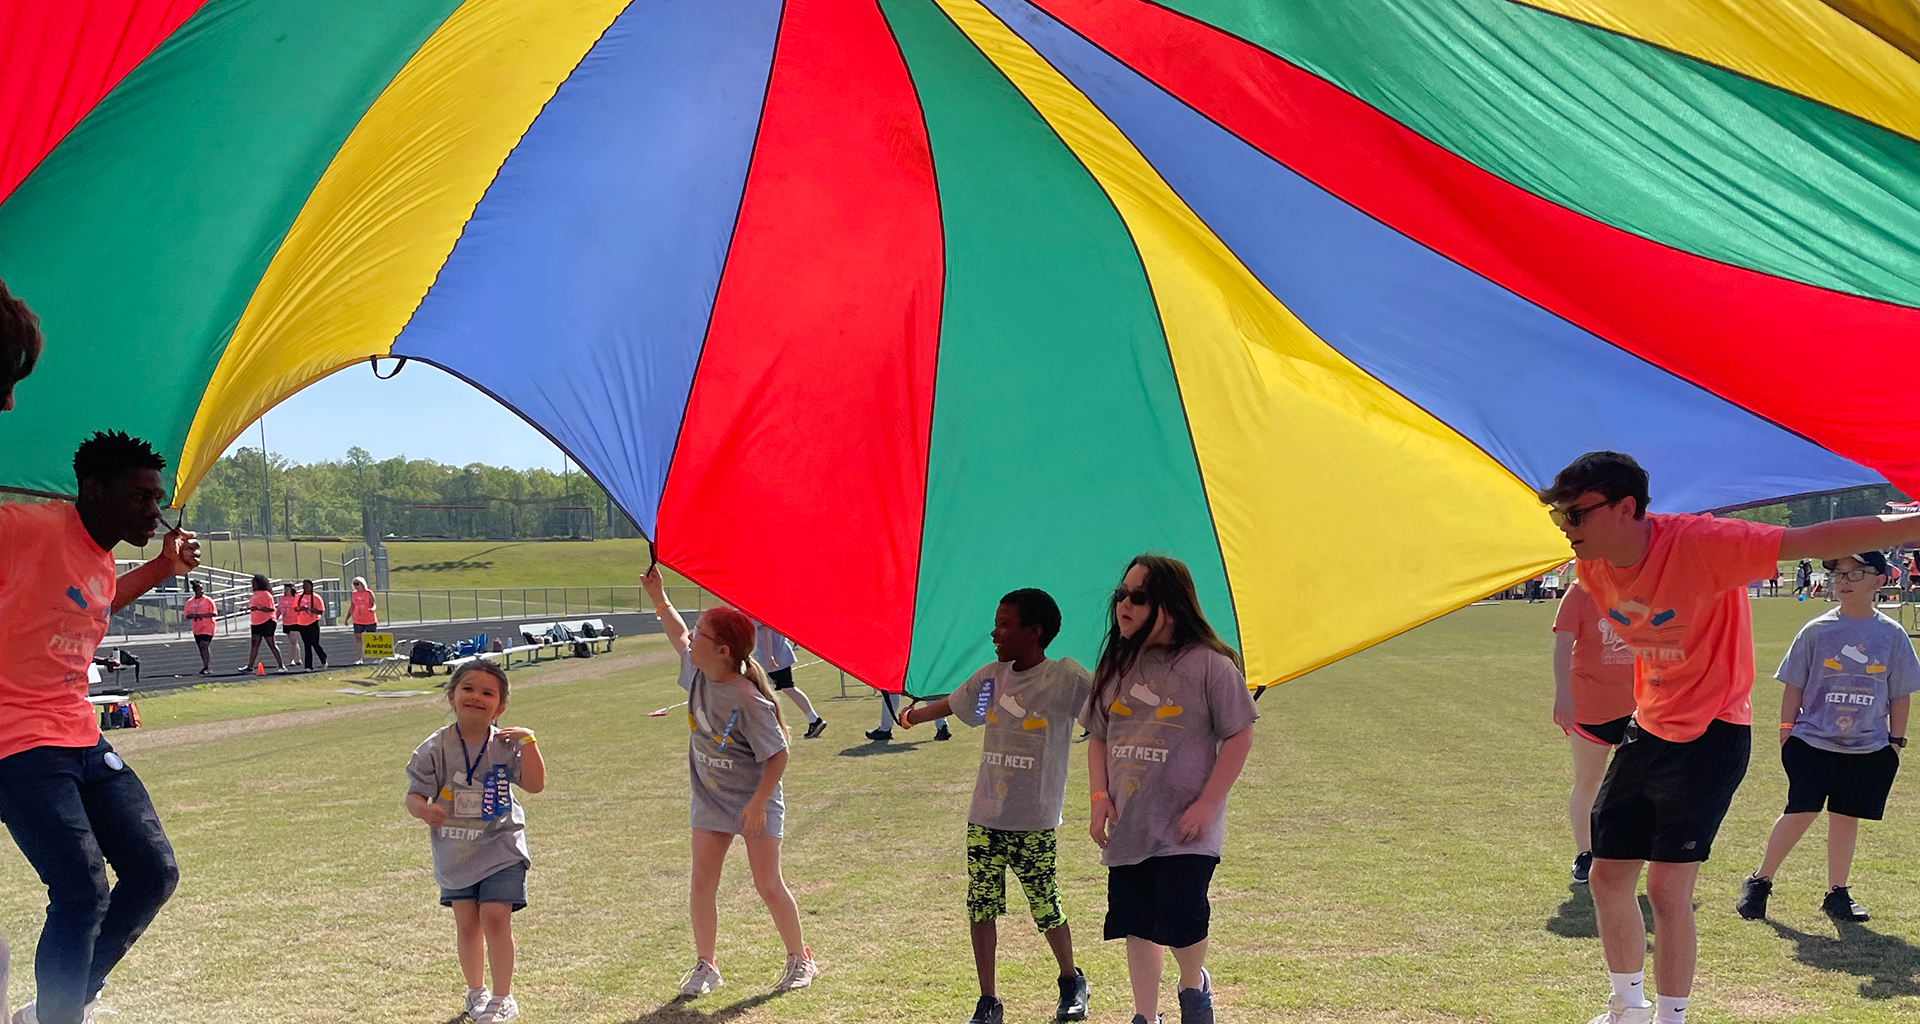 Students waving giant parachute and running under it. 